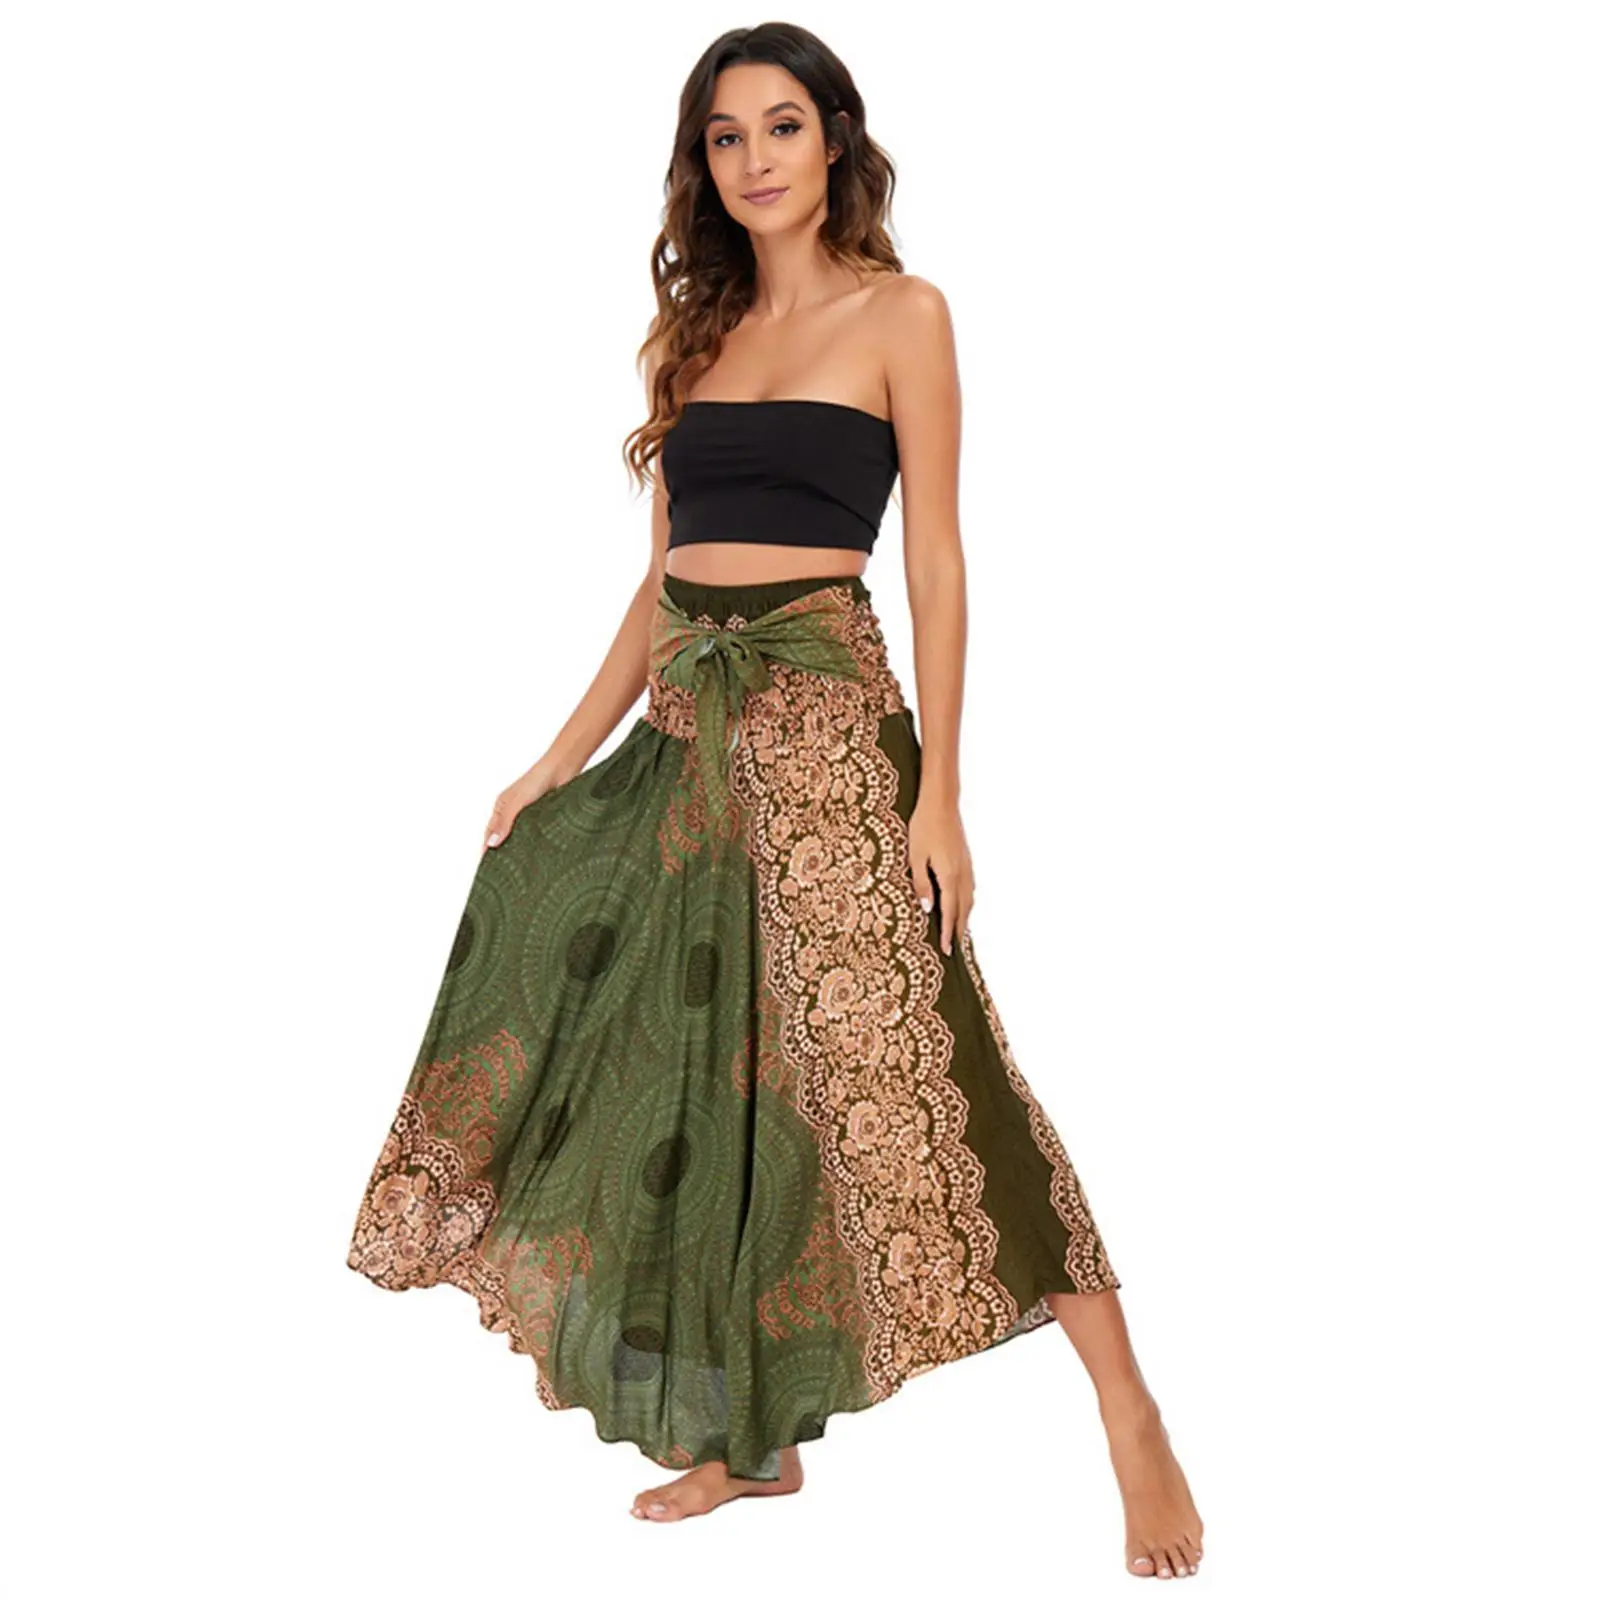 Cotton  Maxi Skirt Hippie Style Bohemian High Waisted Printed Dancing Costume Wrap  for Women Stage Performance Latin  Dance